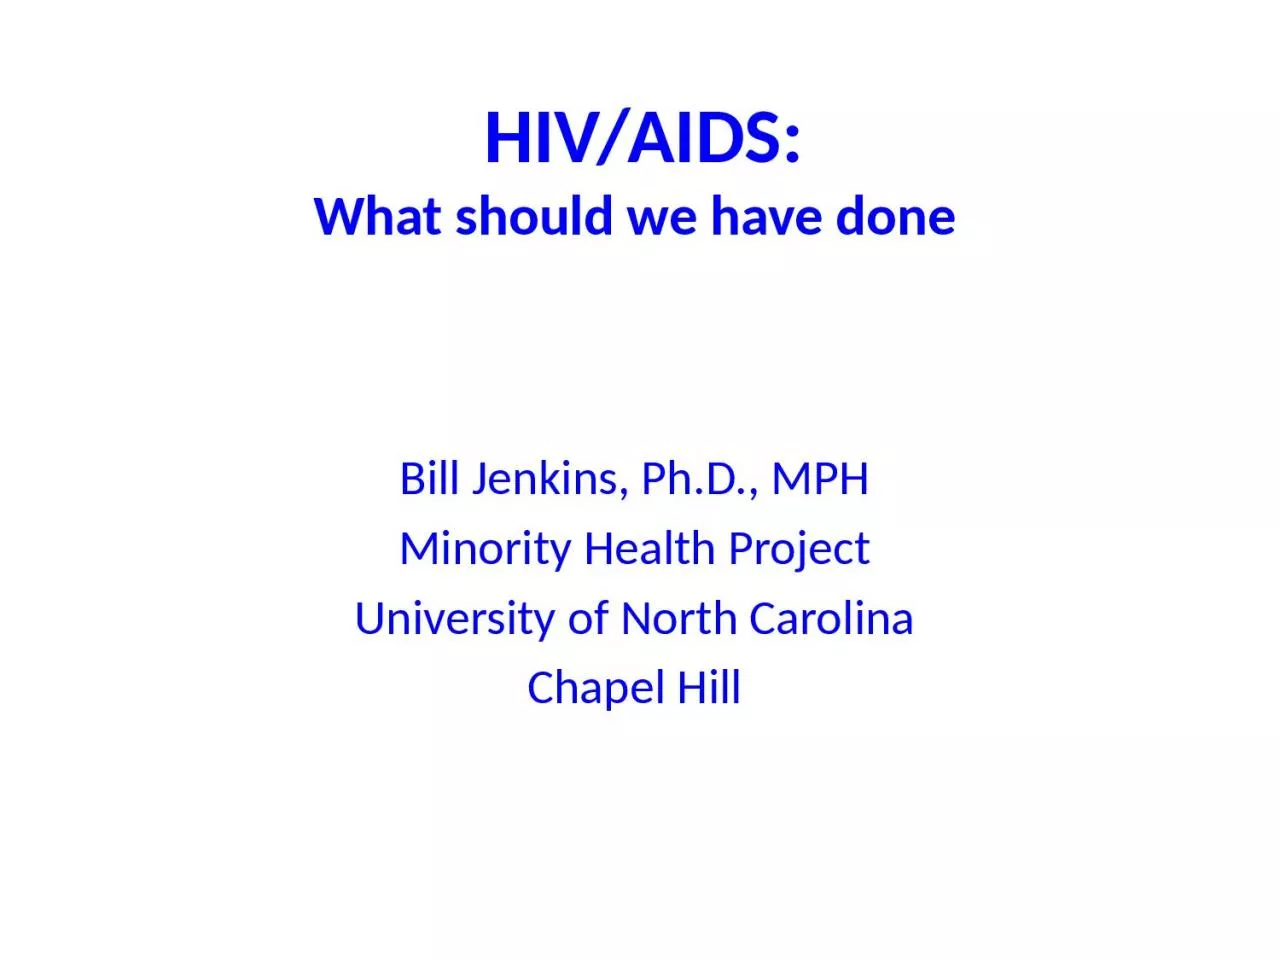 HIV/AIDS: What should we have done